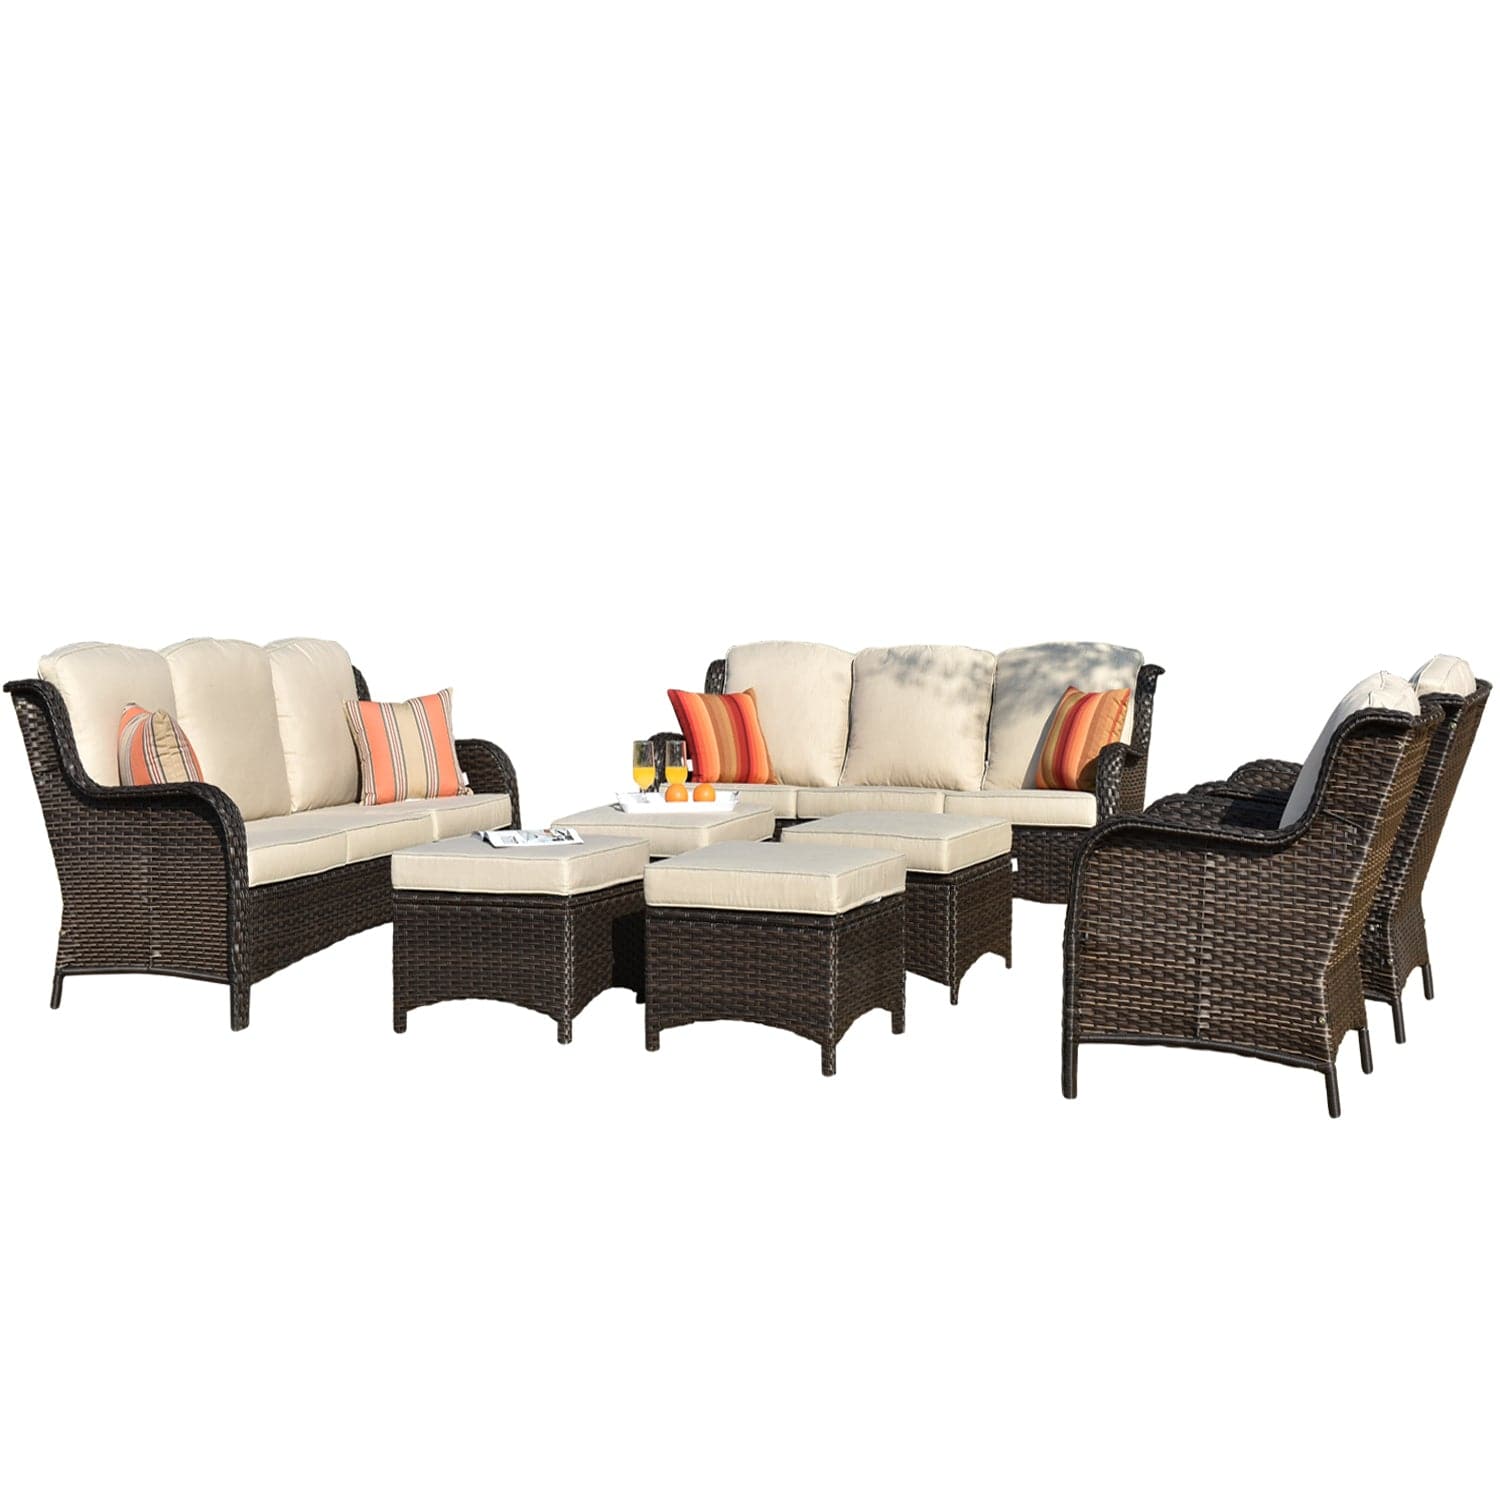 Ovios Outdoor Furniture 8-Piece with Cushions Kenard Curved Handrest